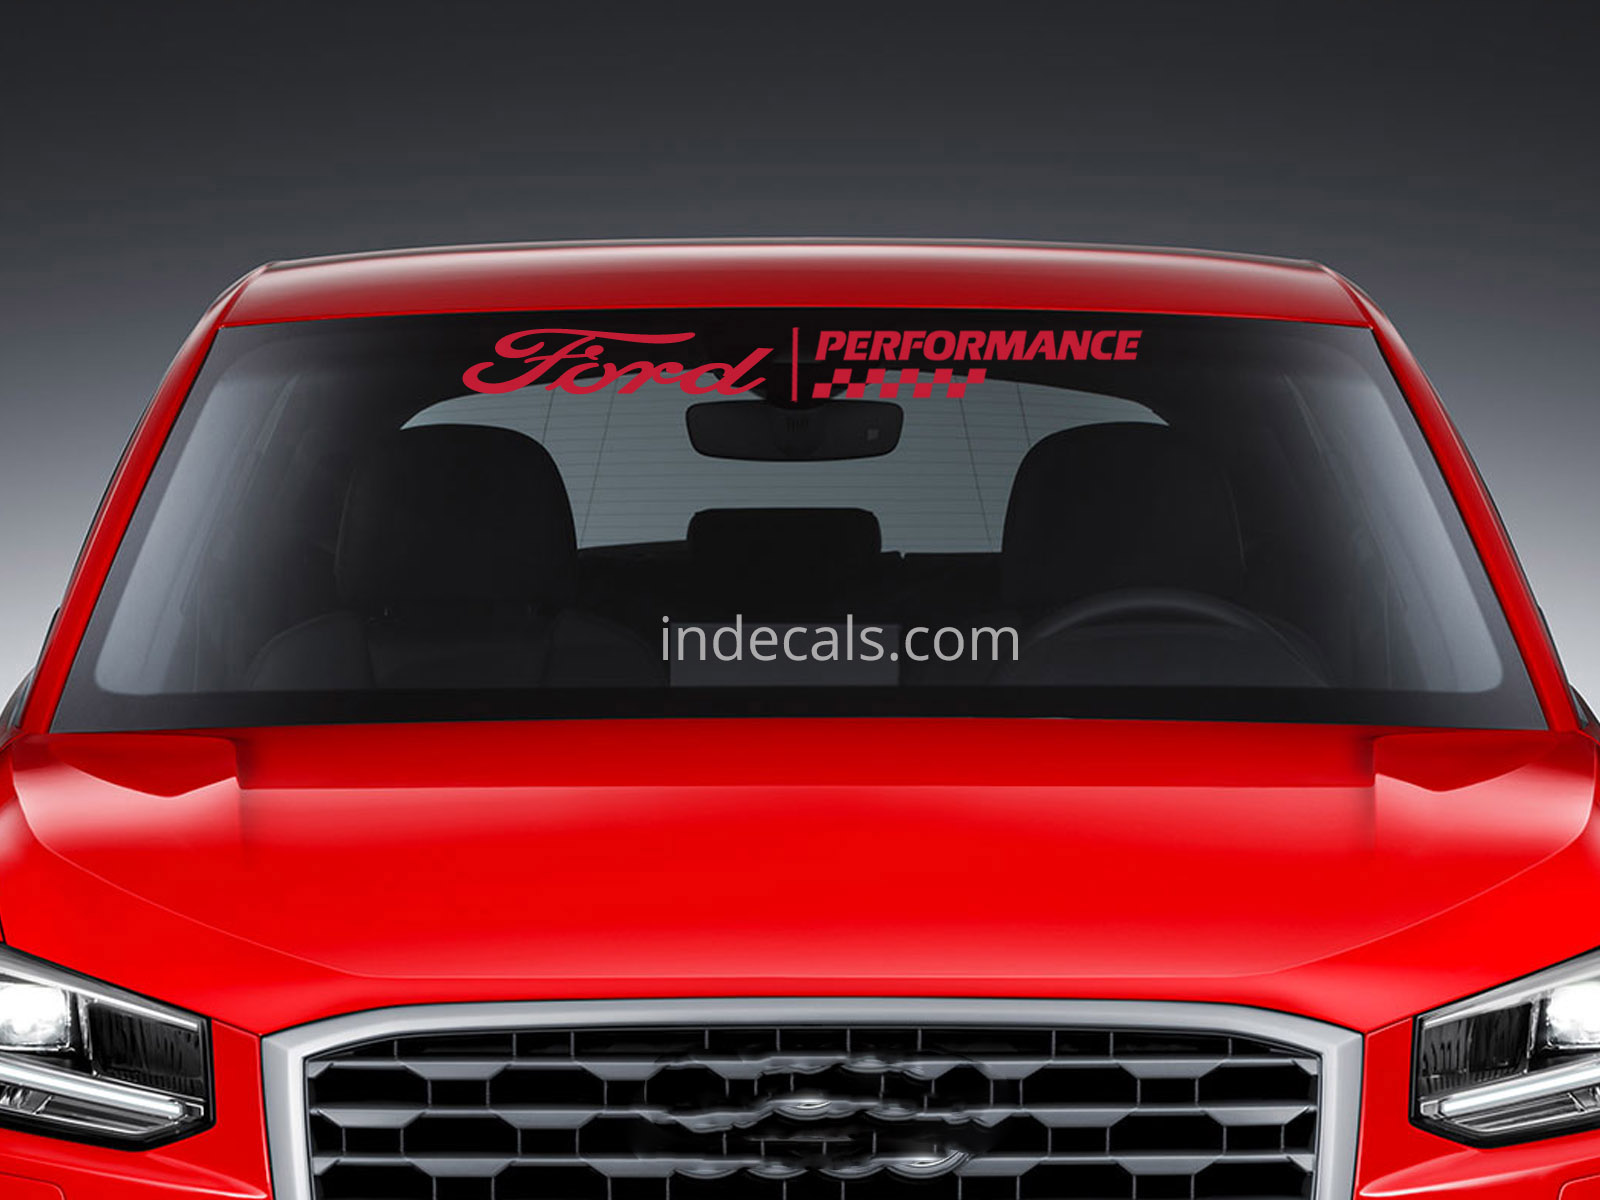 1 x Ford Performance Sticker for Windshield or Back Window - Red